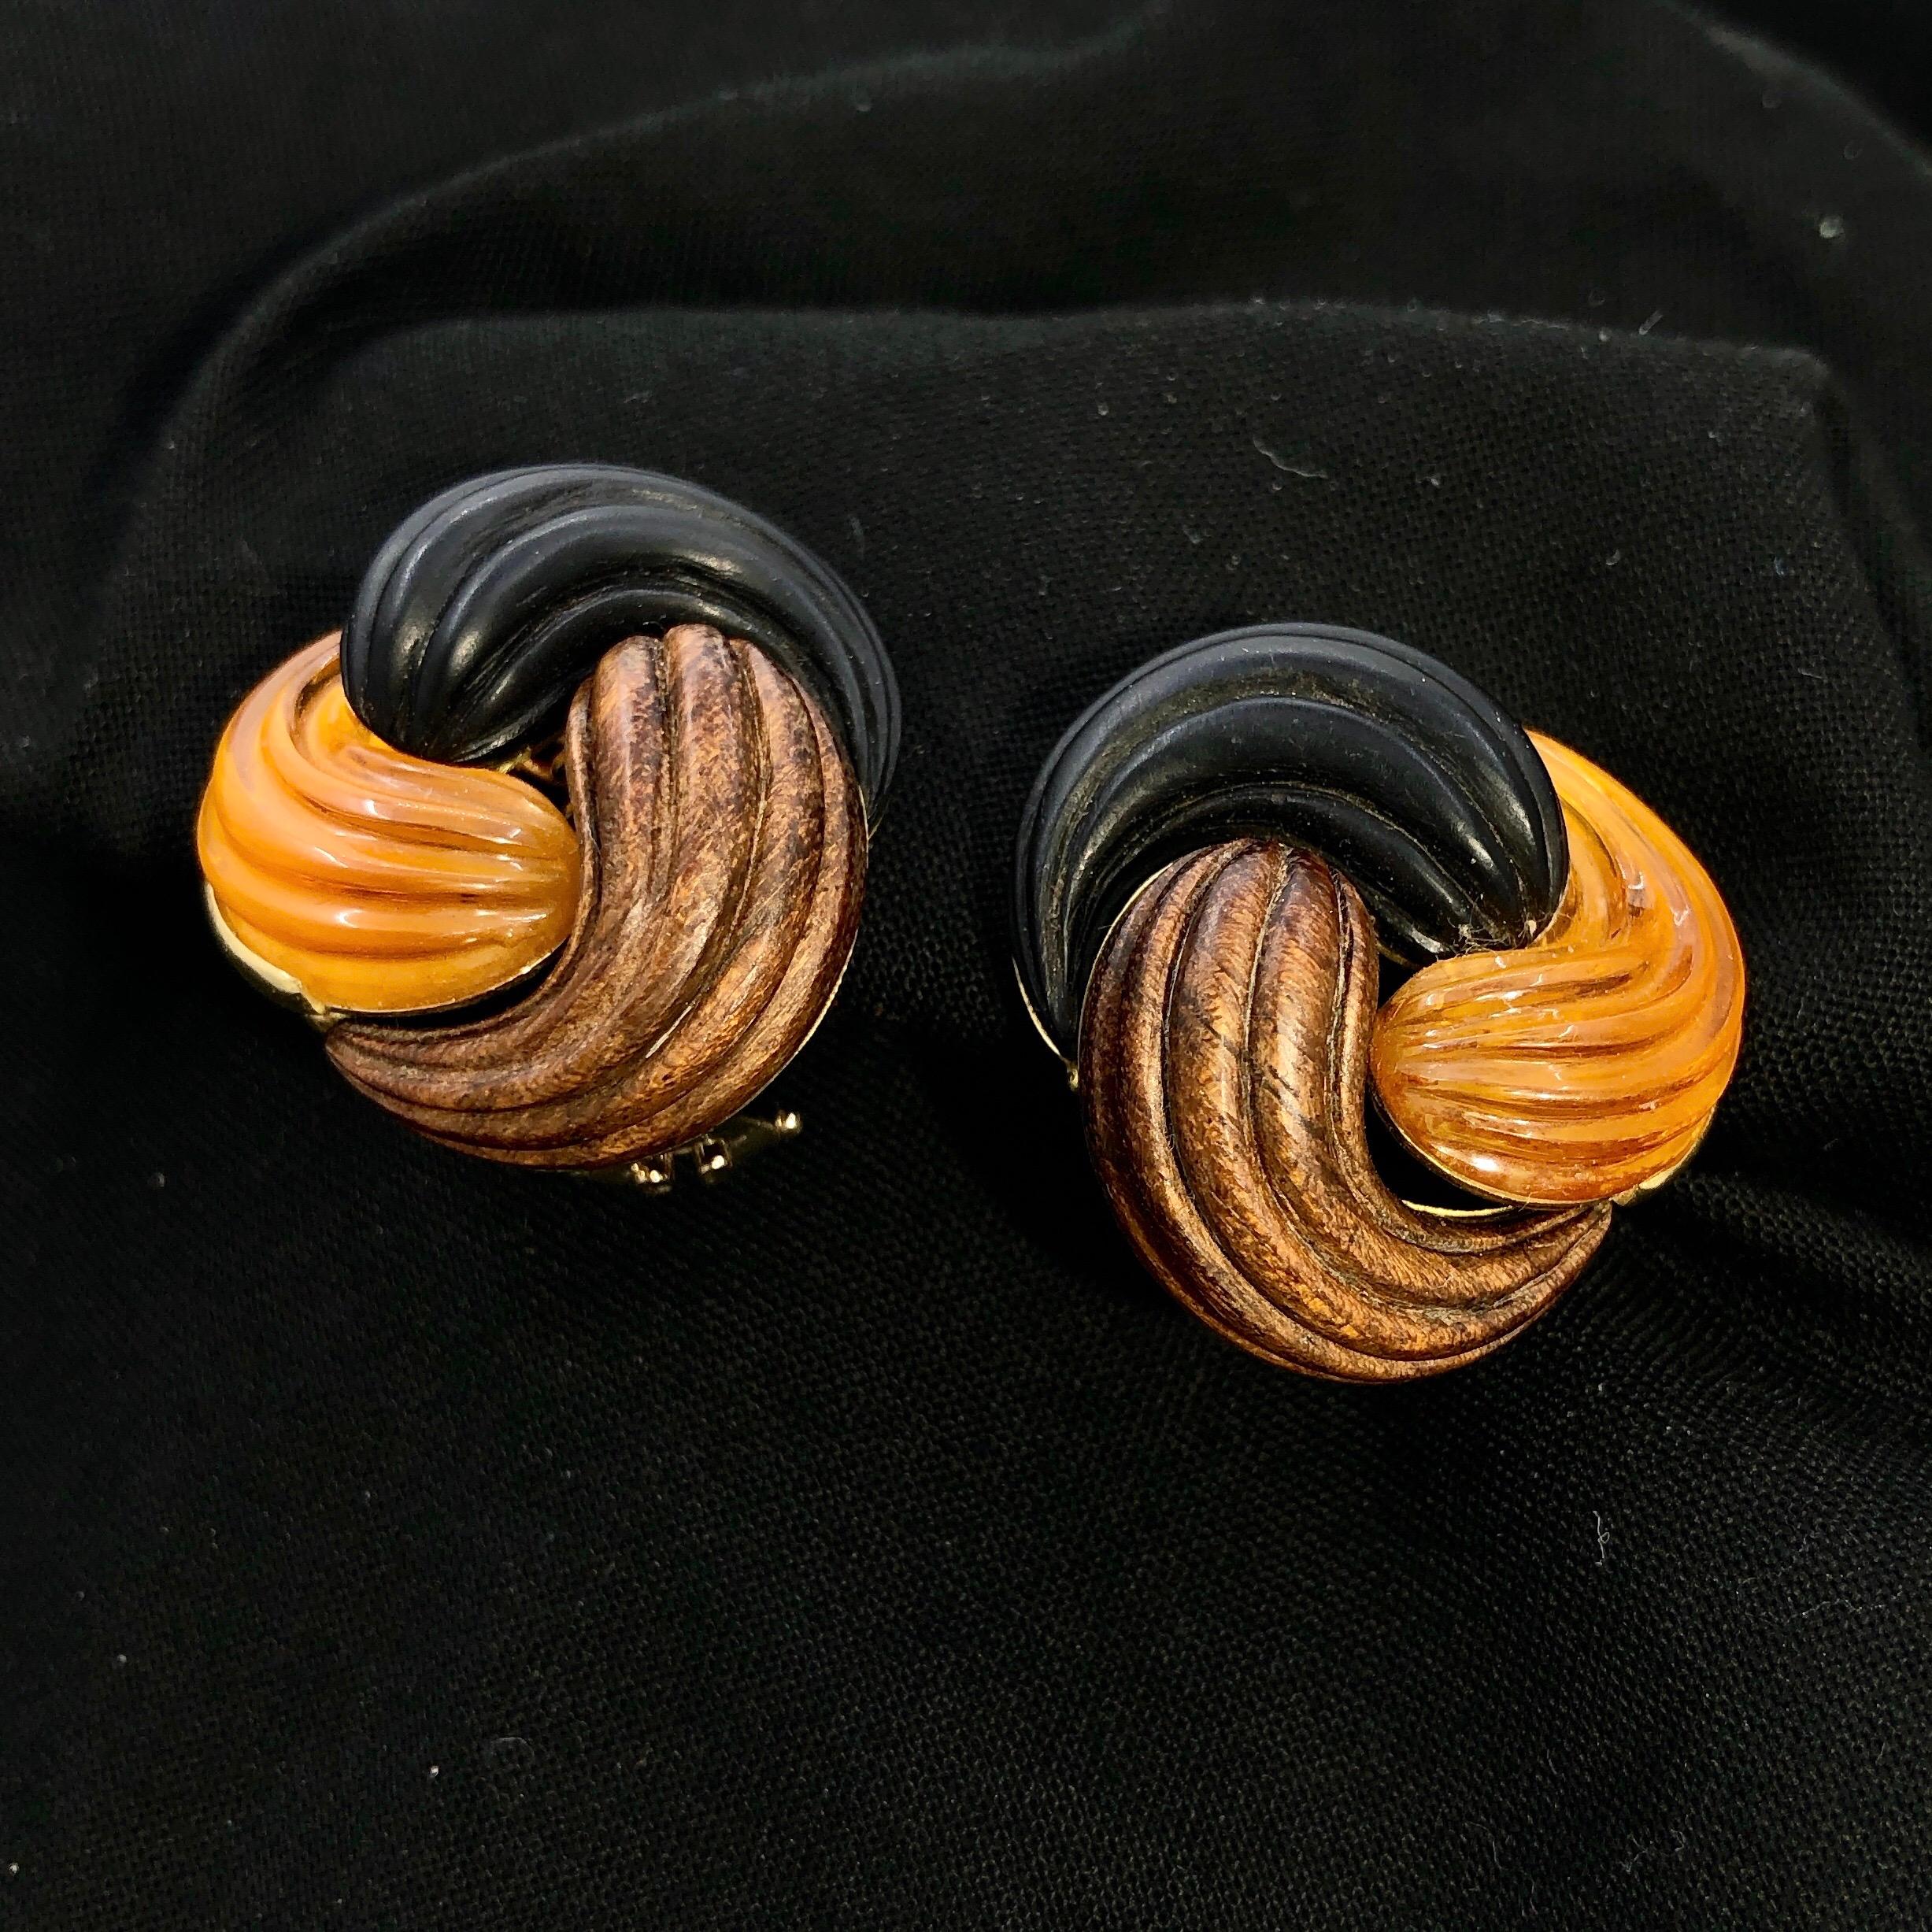 Women's Lovely Italian Autumn Colored Fluted Woods, Amber and Gold Knot Style Earrings